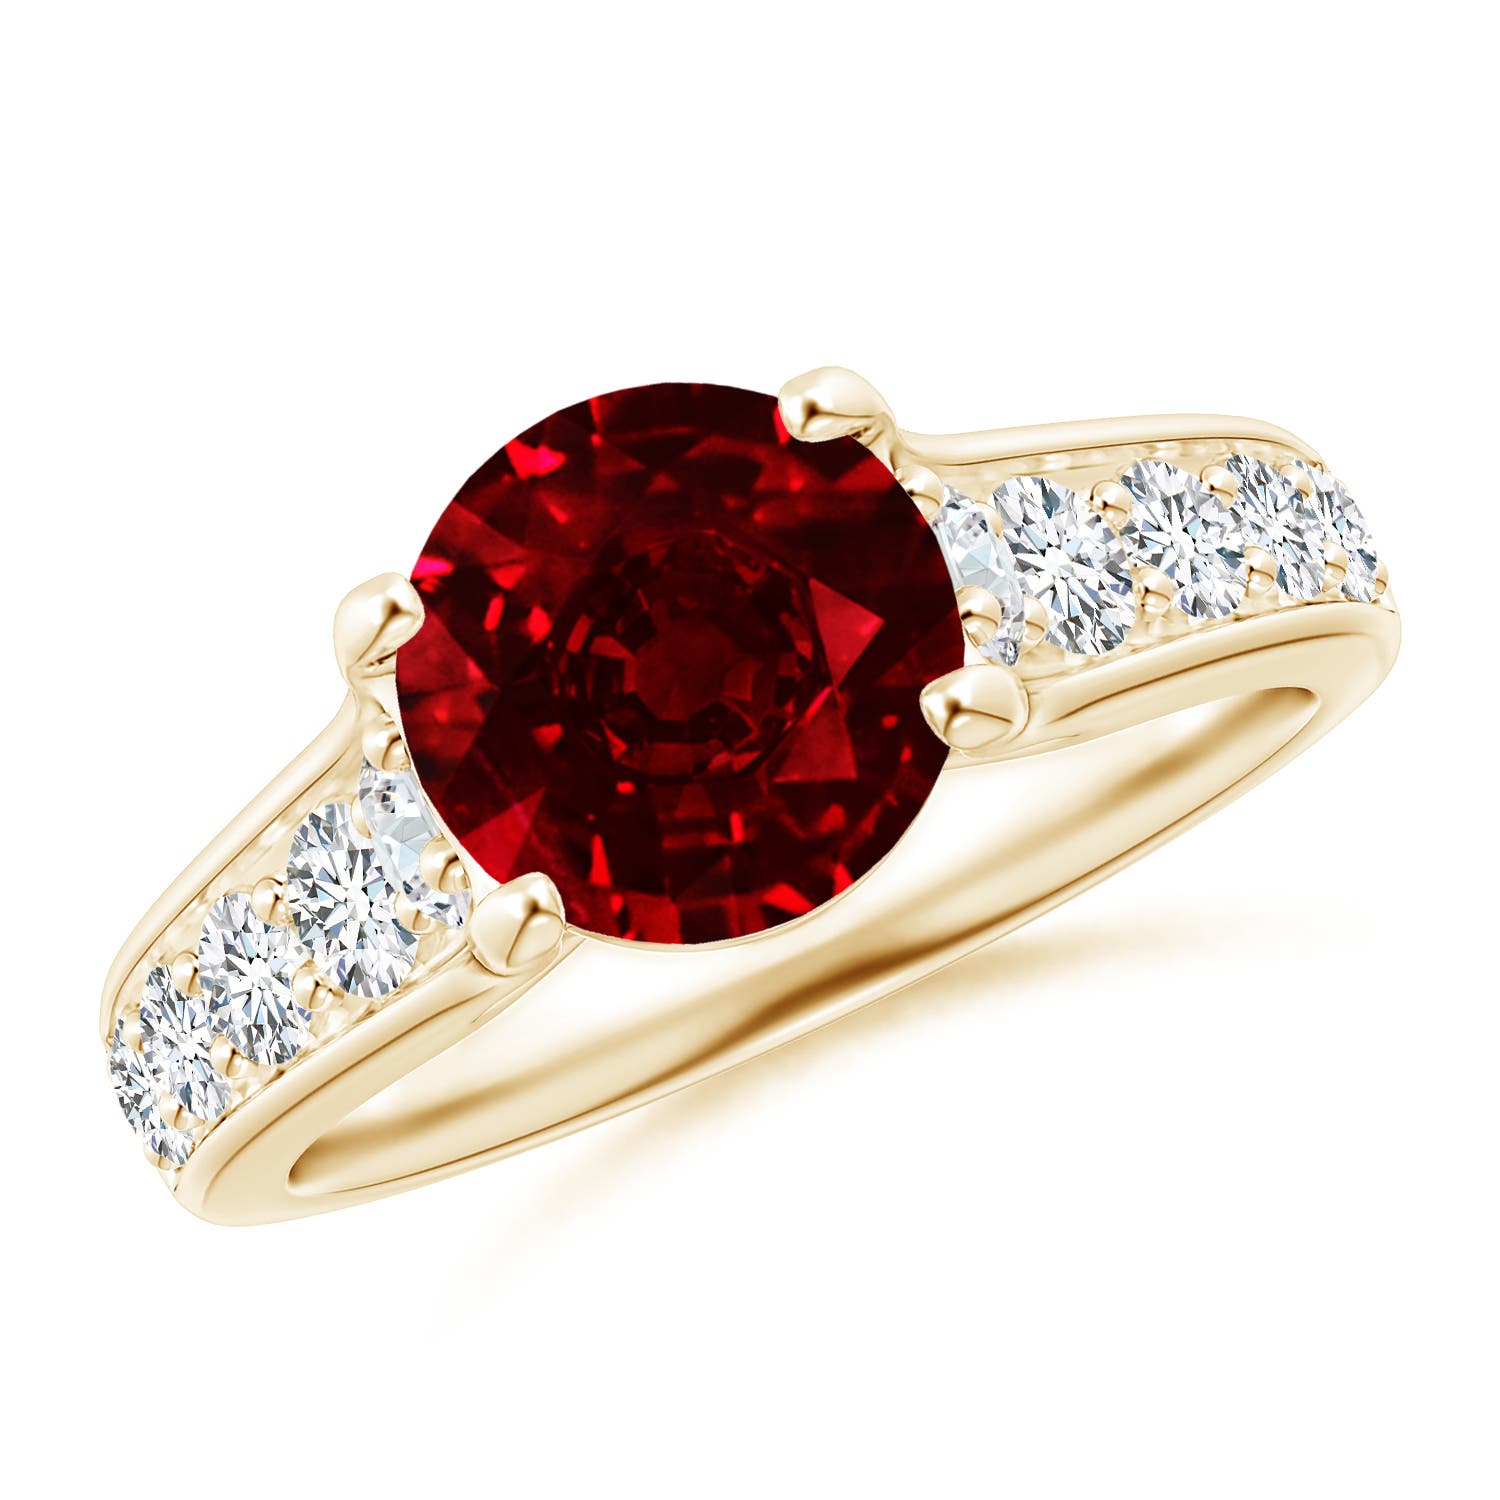 AAAA - Ruby / 2.8 CT / 14 KT Yellow Gold